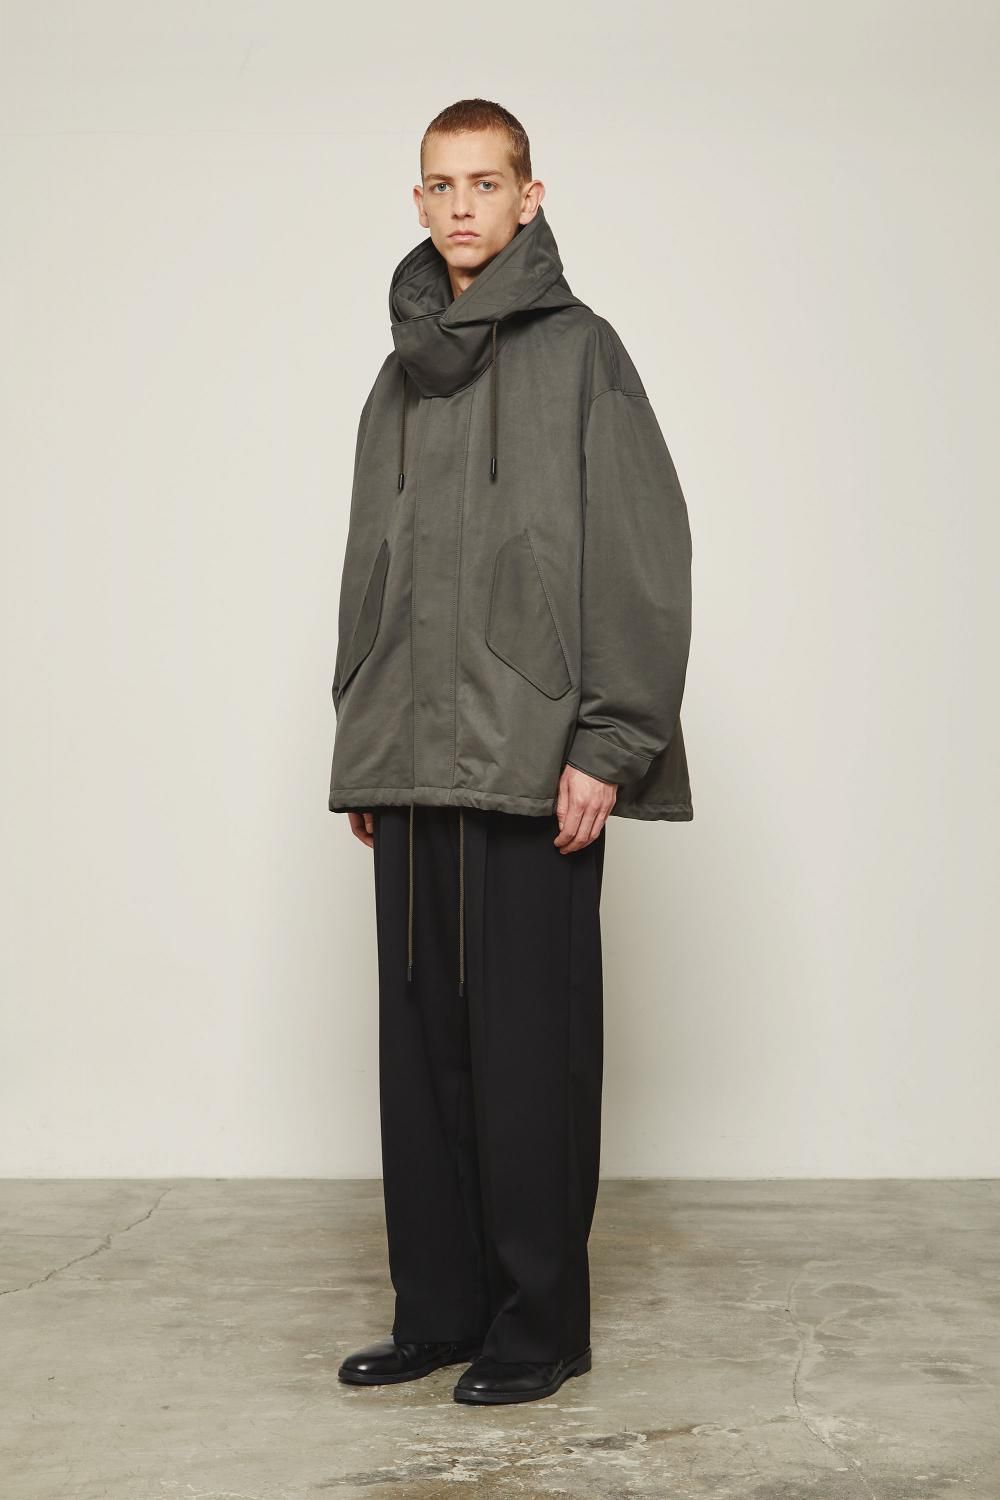 【THE RERACS / ザ リラクス】23AW COLLECTION - 